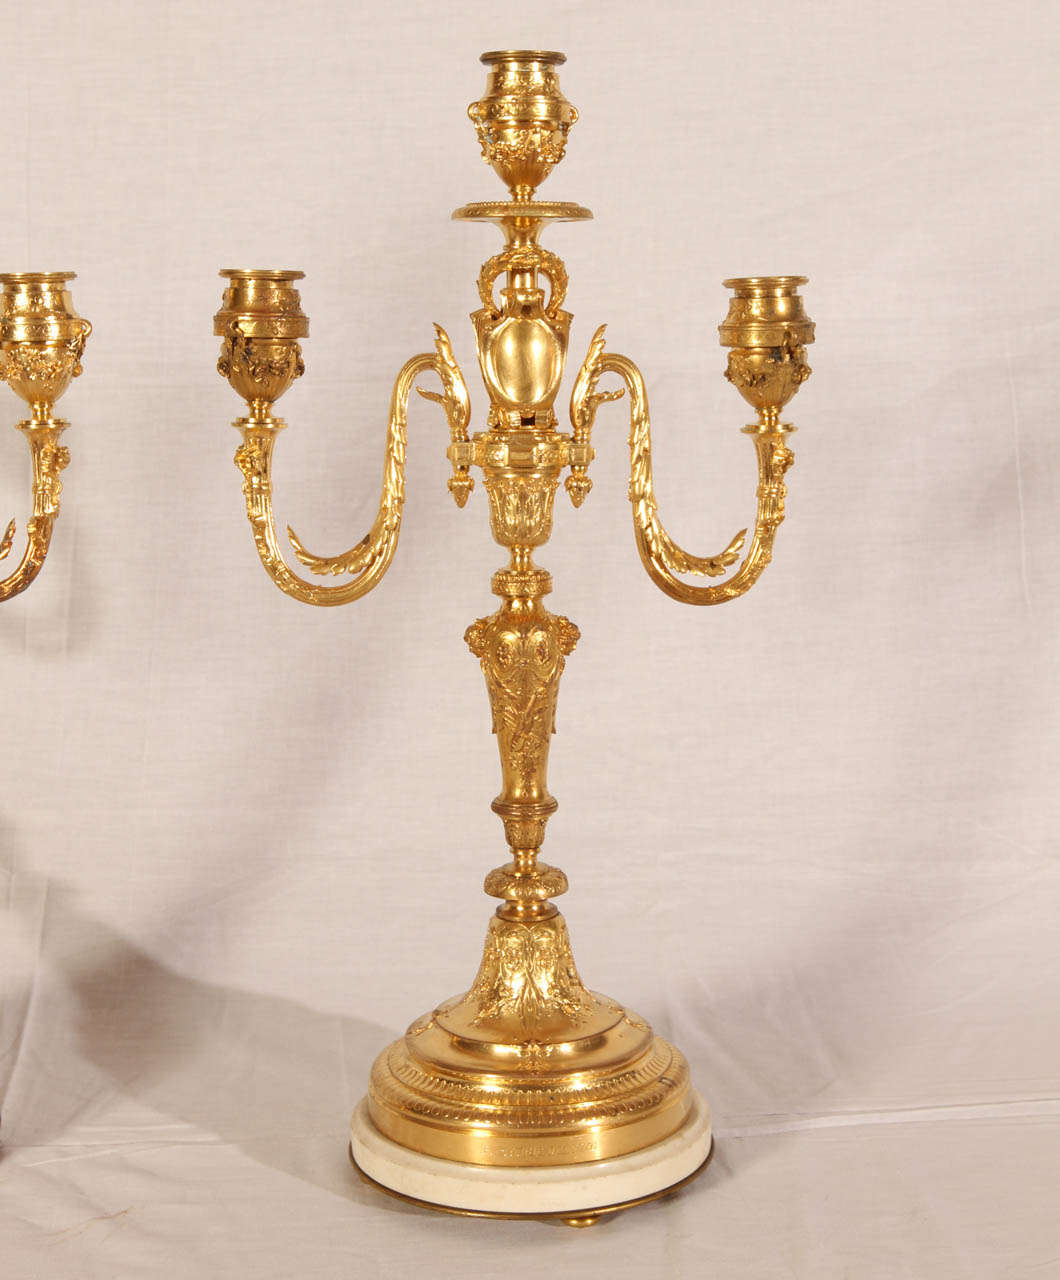 French Pair of Napoleon III Period Candelabras For Sale